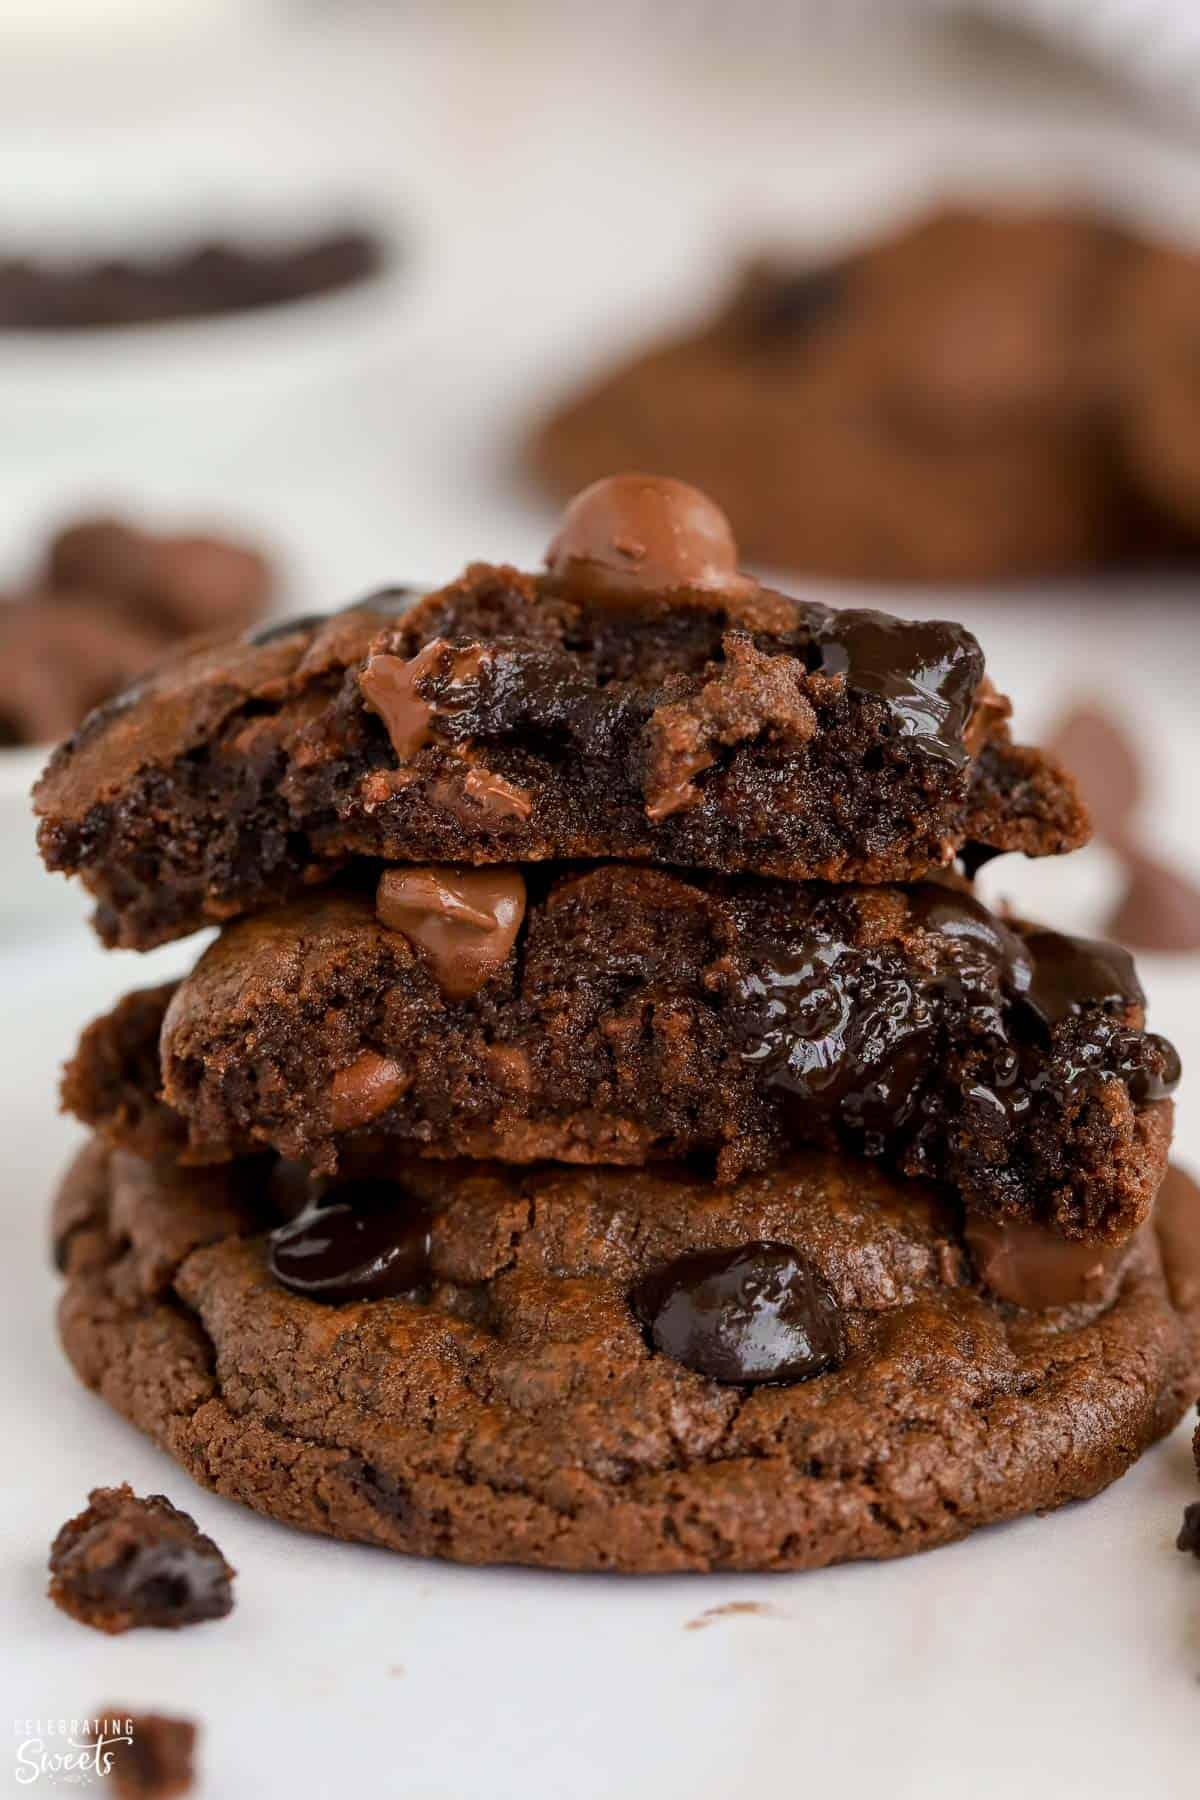 Stack of chocolate cookies broken in half with melted chocolate chips inside